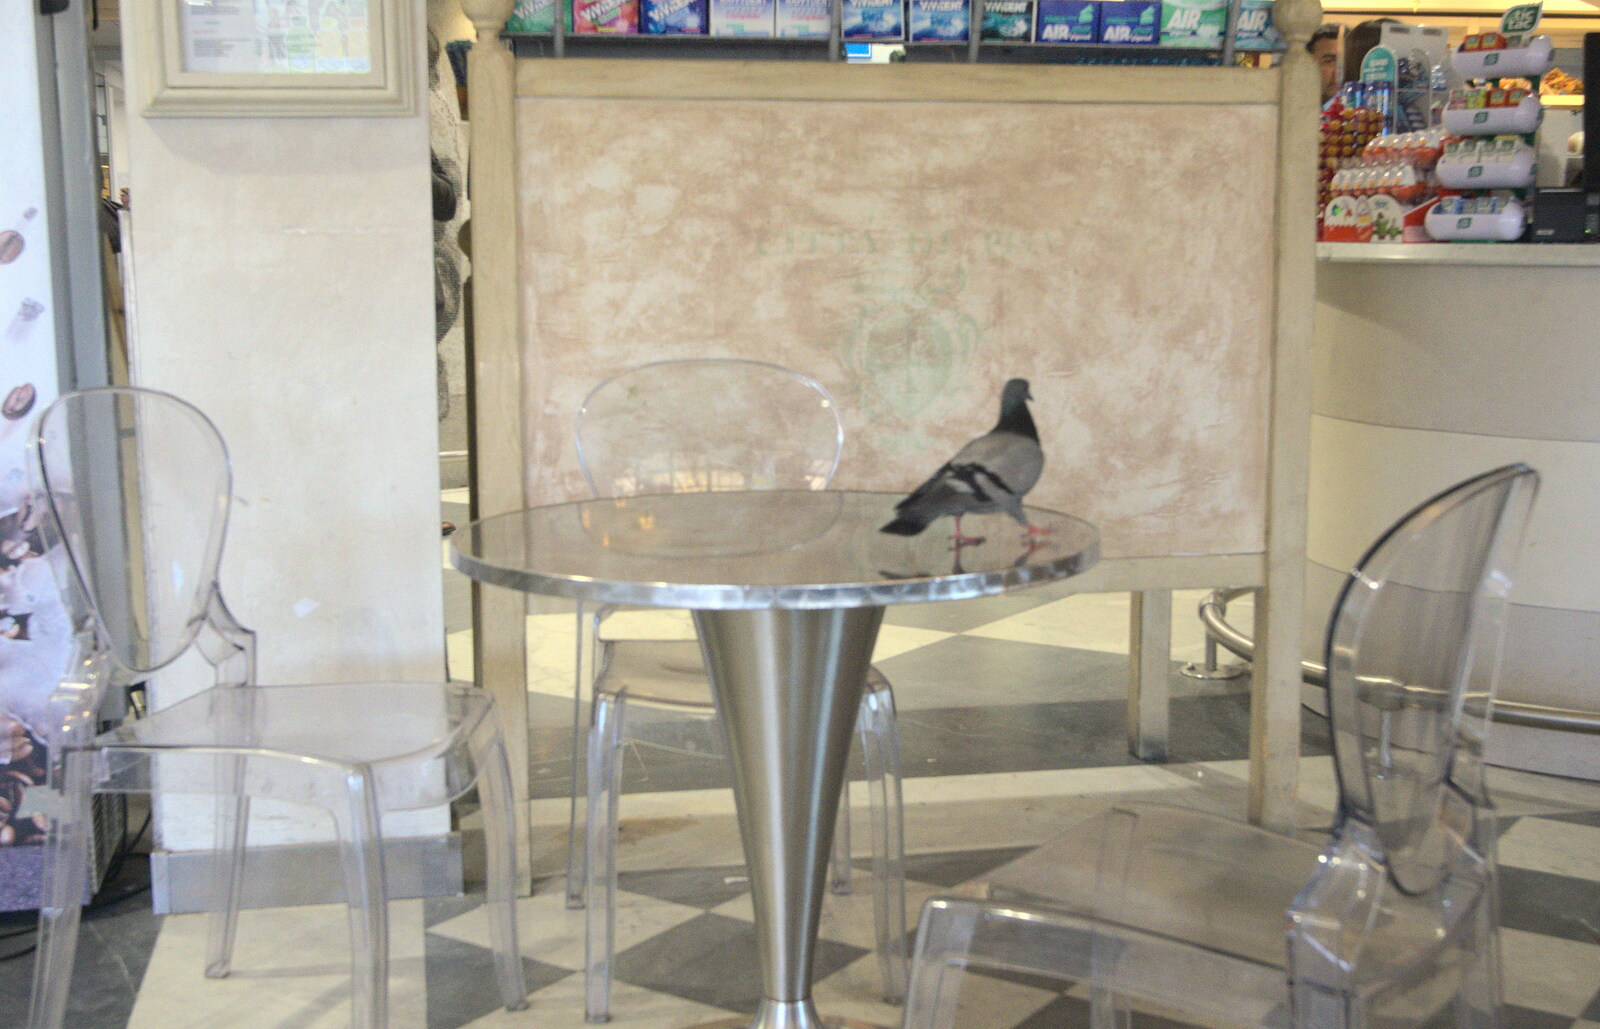 There's a pigeon in the actual café from La Verna Monastery and the Fireflies of Tuscany, Italy - 14th June 2013